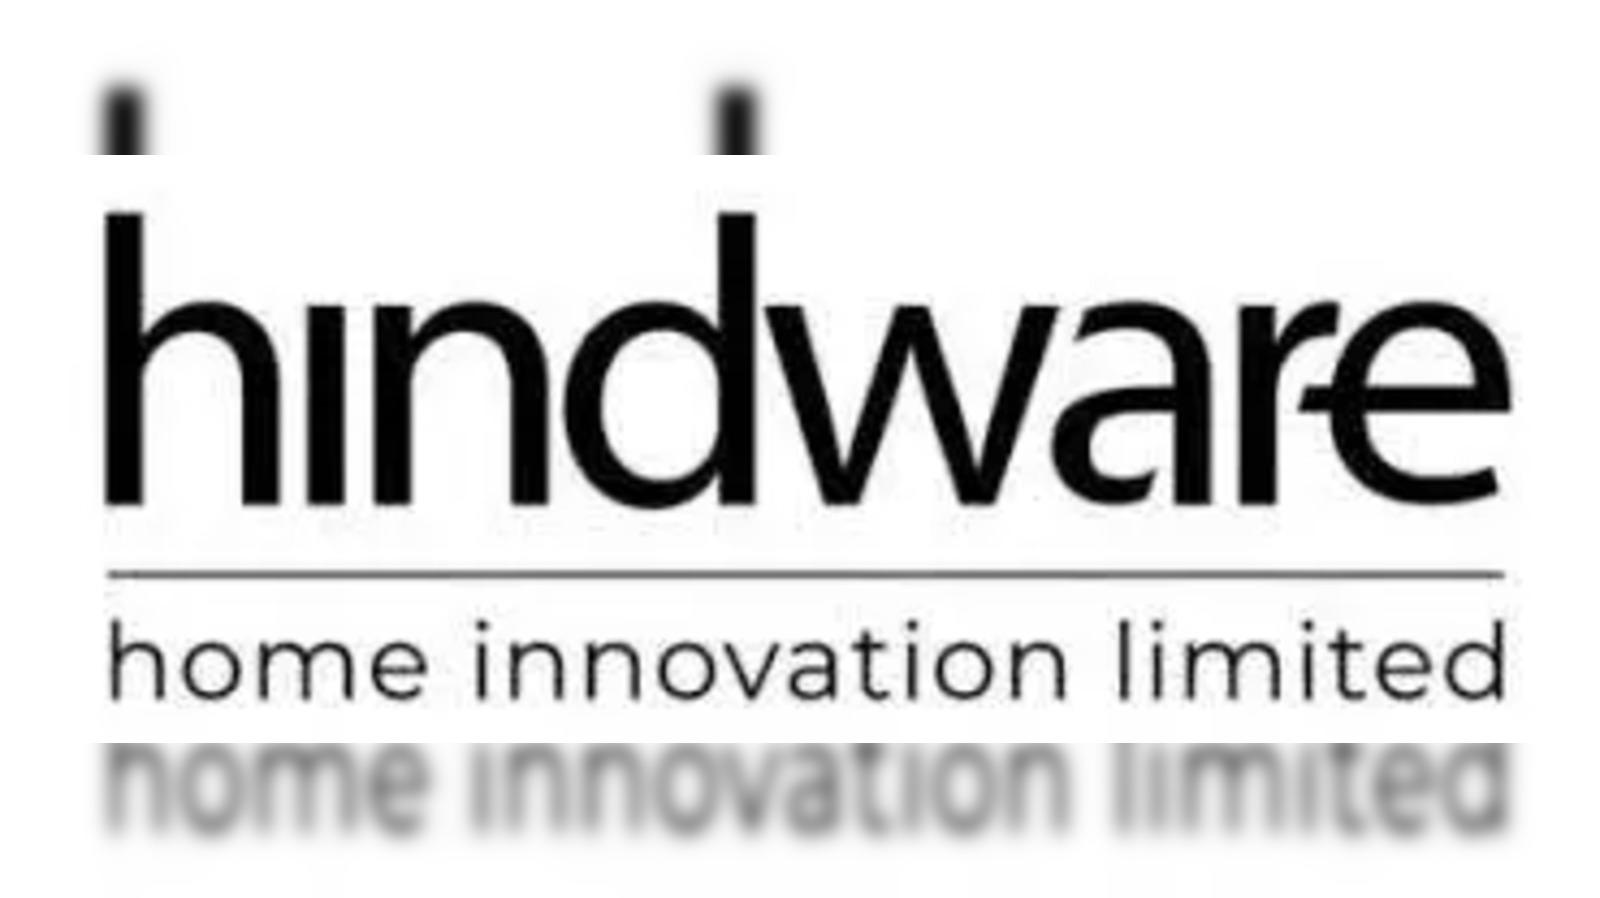 TagoreSolutions: Hindware - New Identity